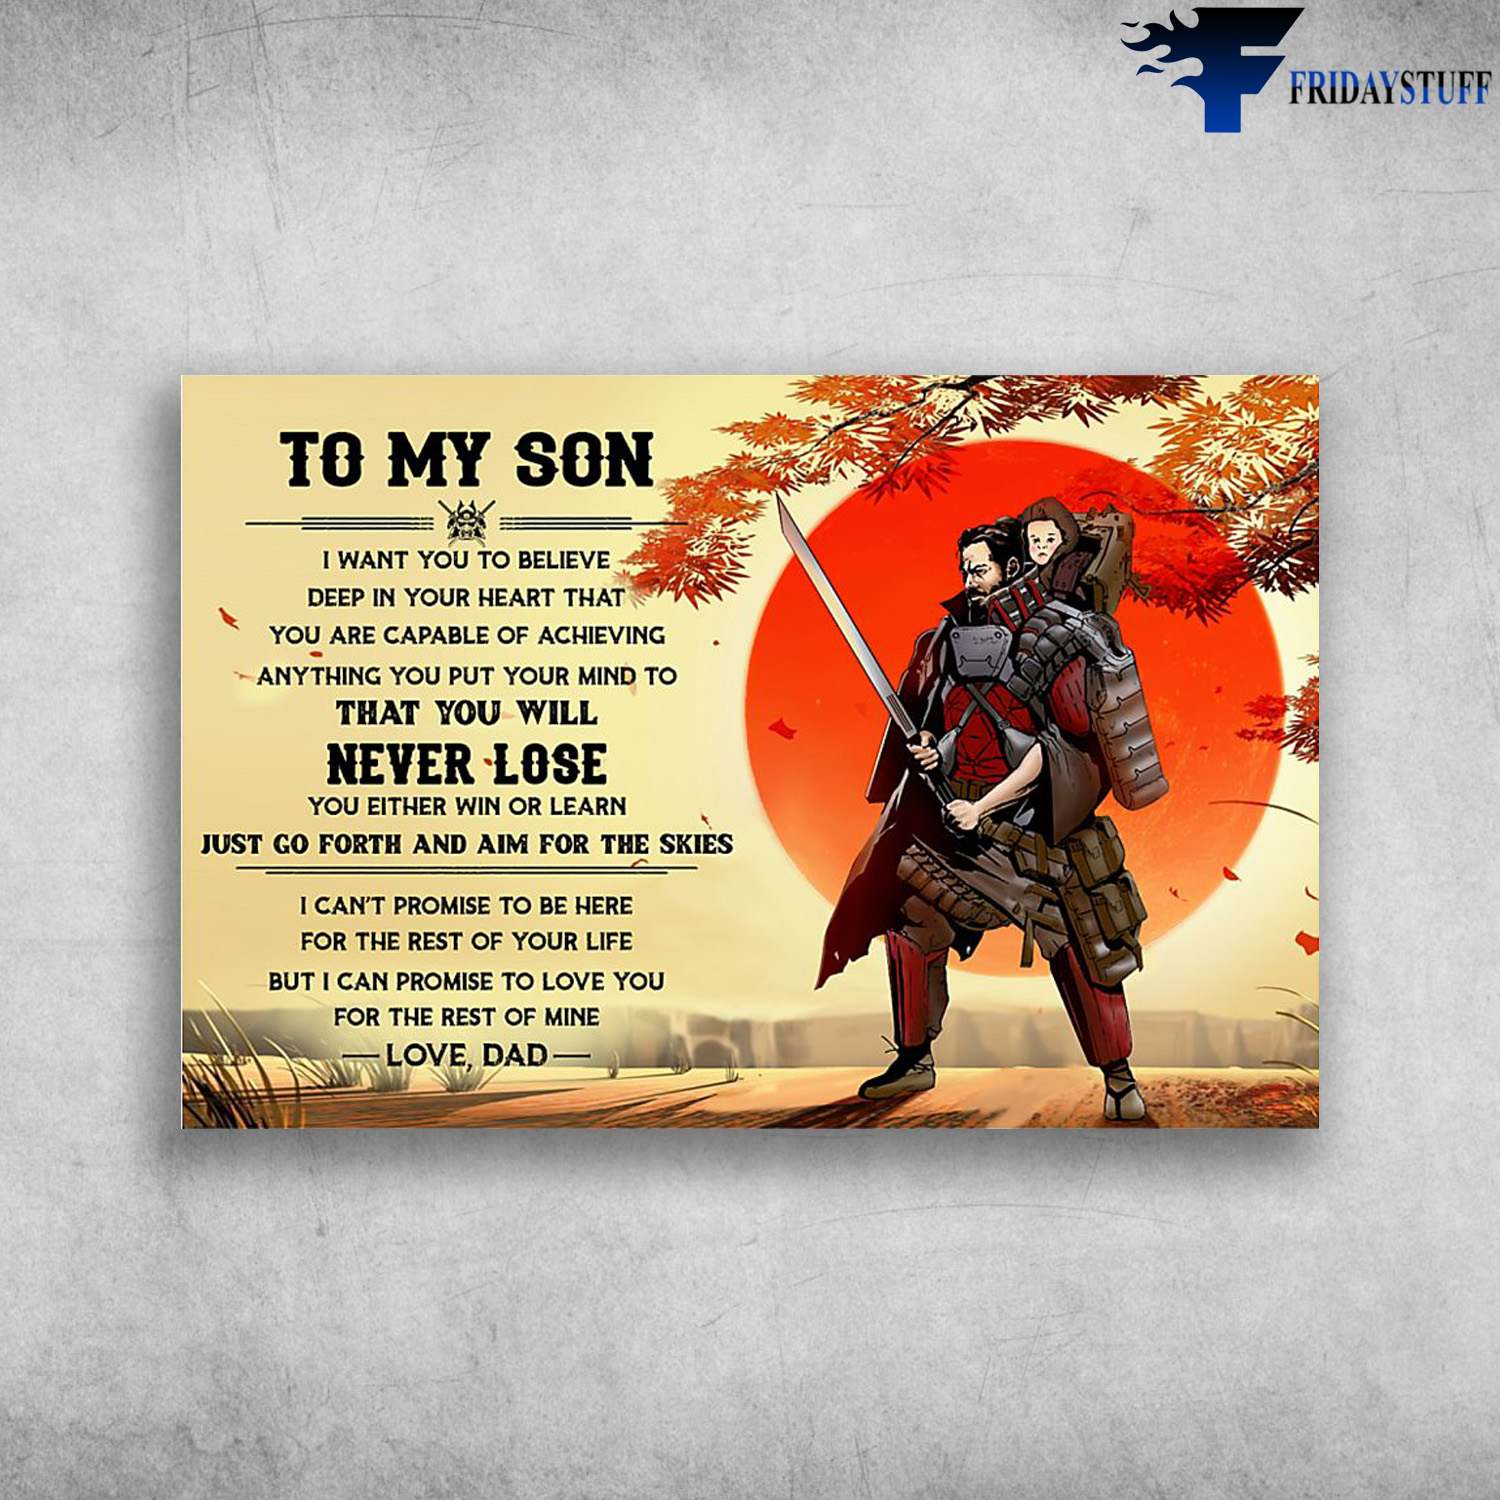 The Samurai And Son - To My Son, I Want You To Believe Deep In Your Heart That, You Are Capable Of Achieving Anything You Put Your Mind To, That You Will Never Lose, You Either Win Or Learn, Just Go Forth And Aim For The Skies